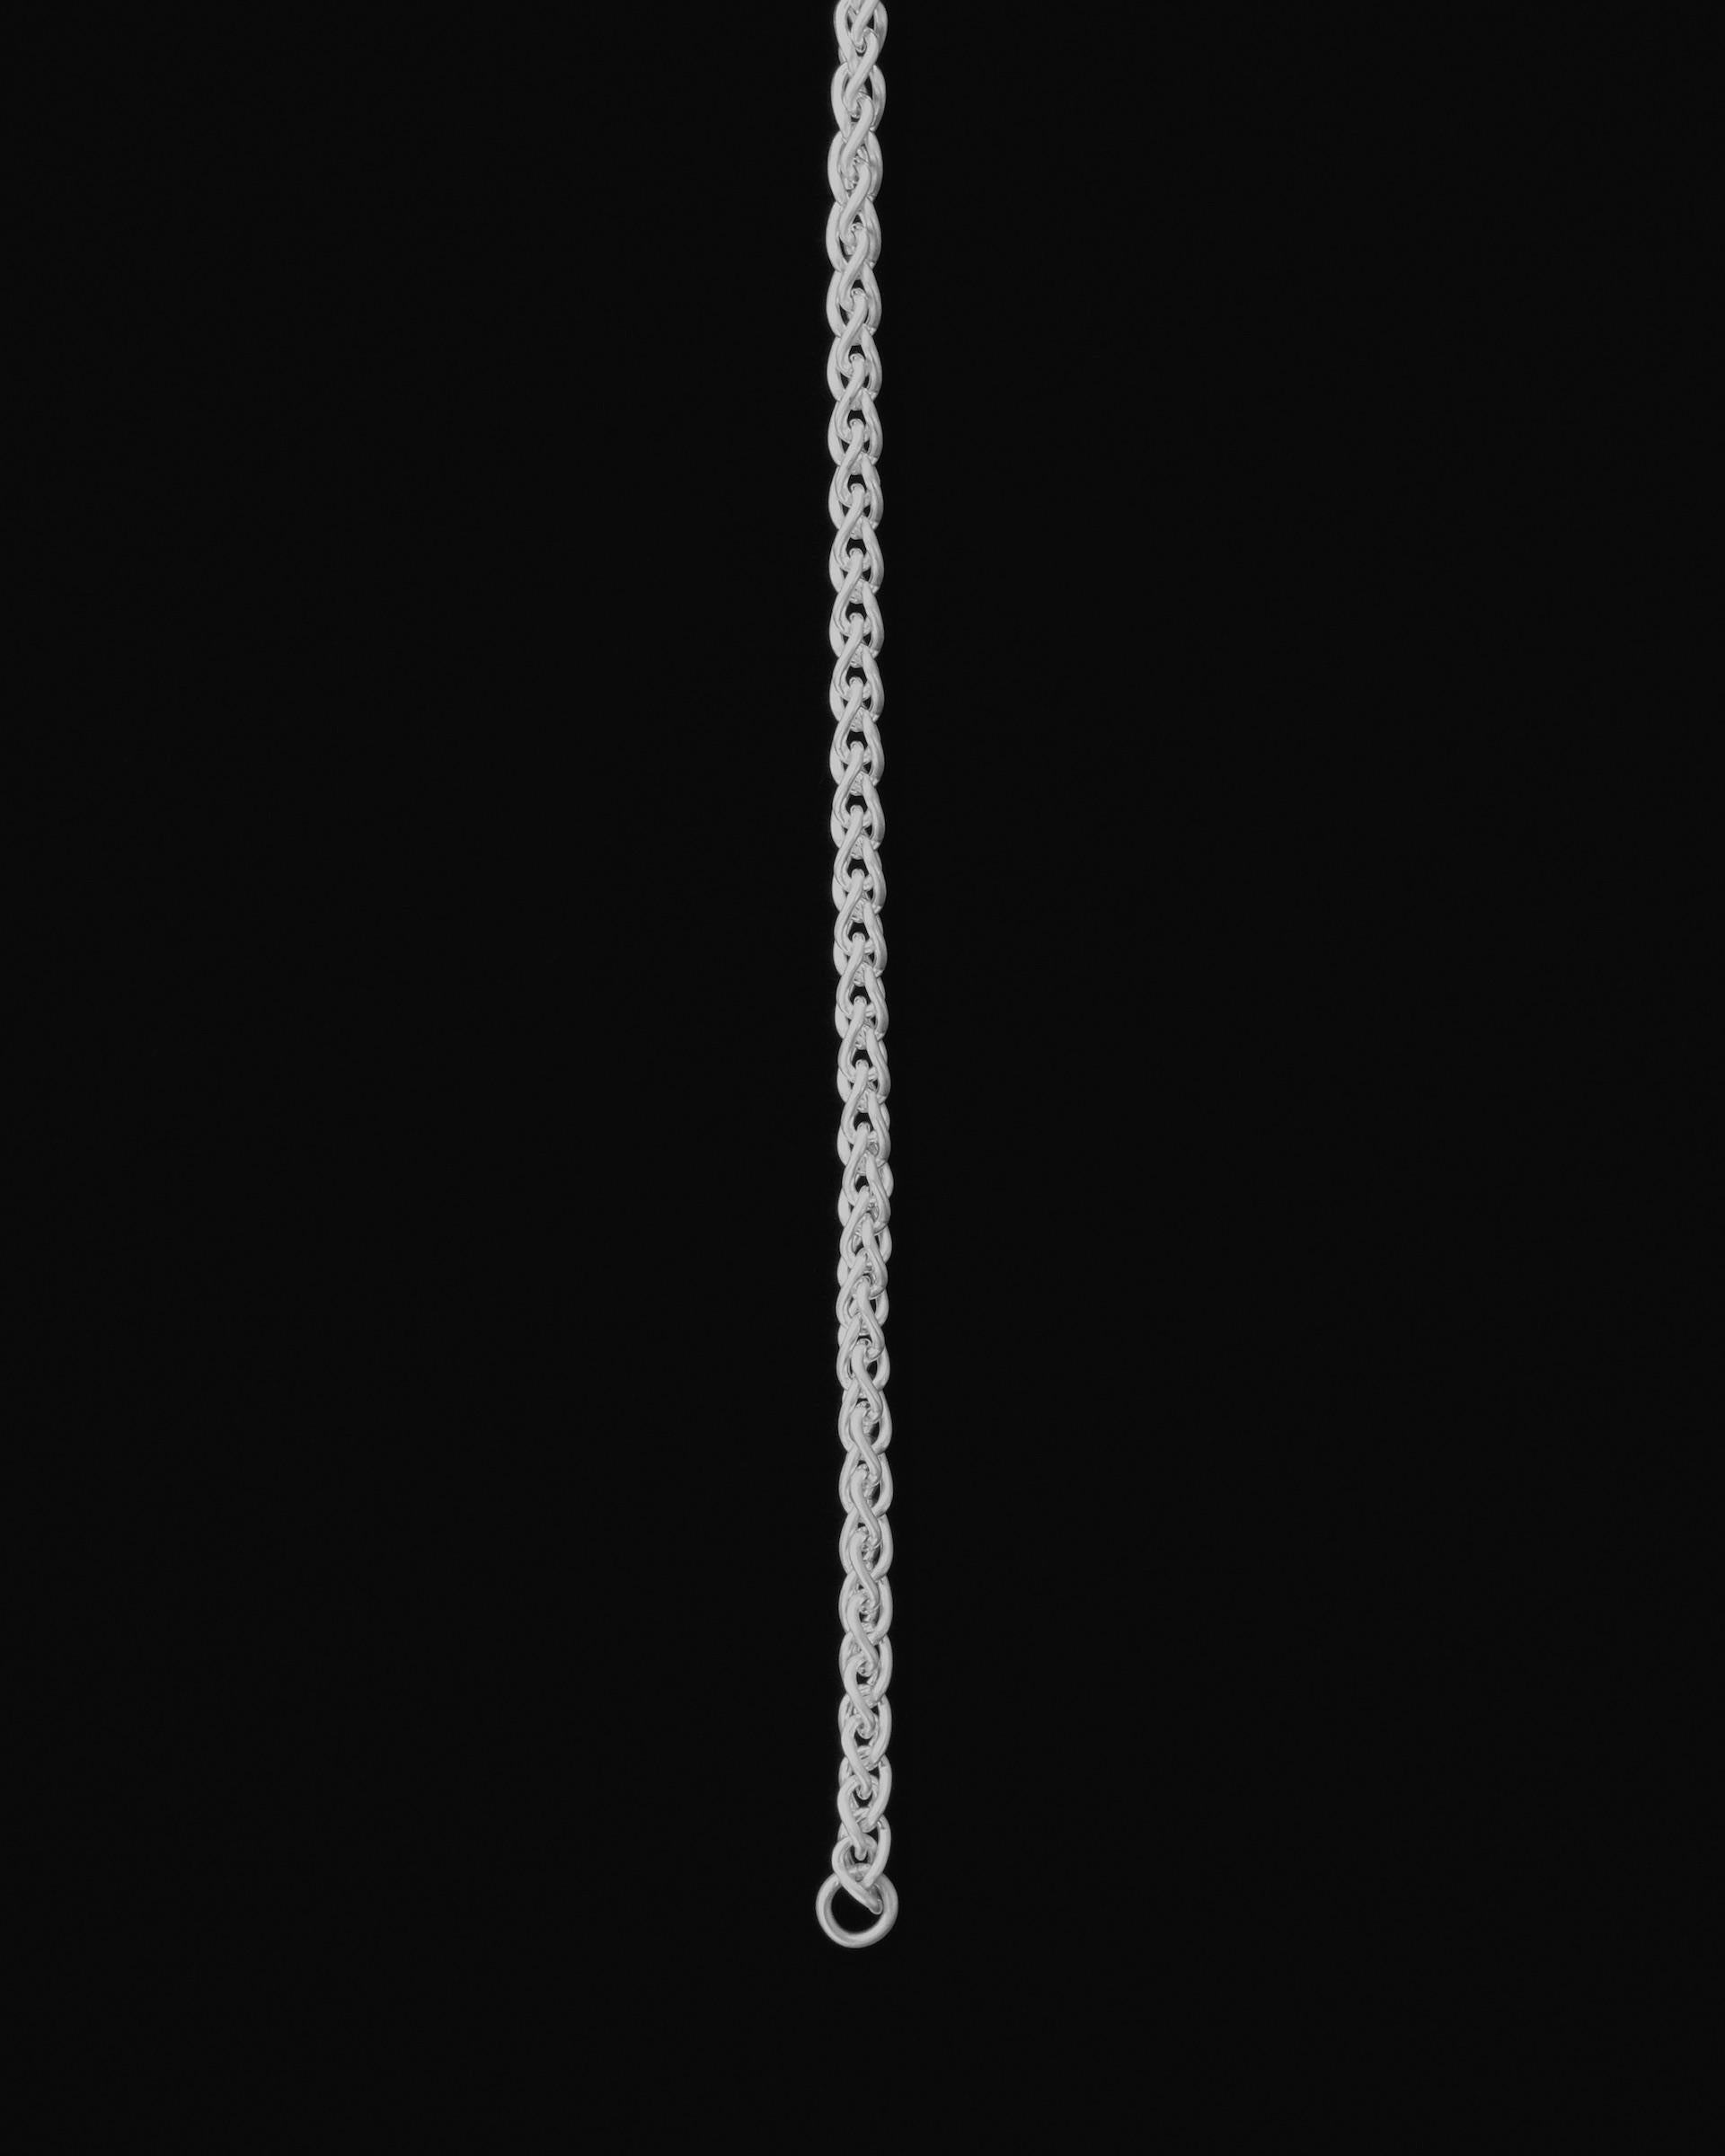 Tiana Marie Combes White Gold Woven Chain Bracelet For Sale 1